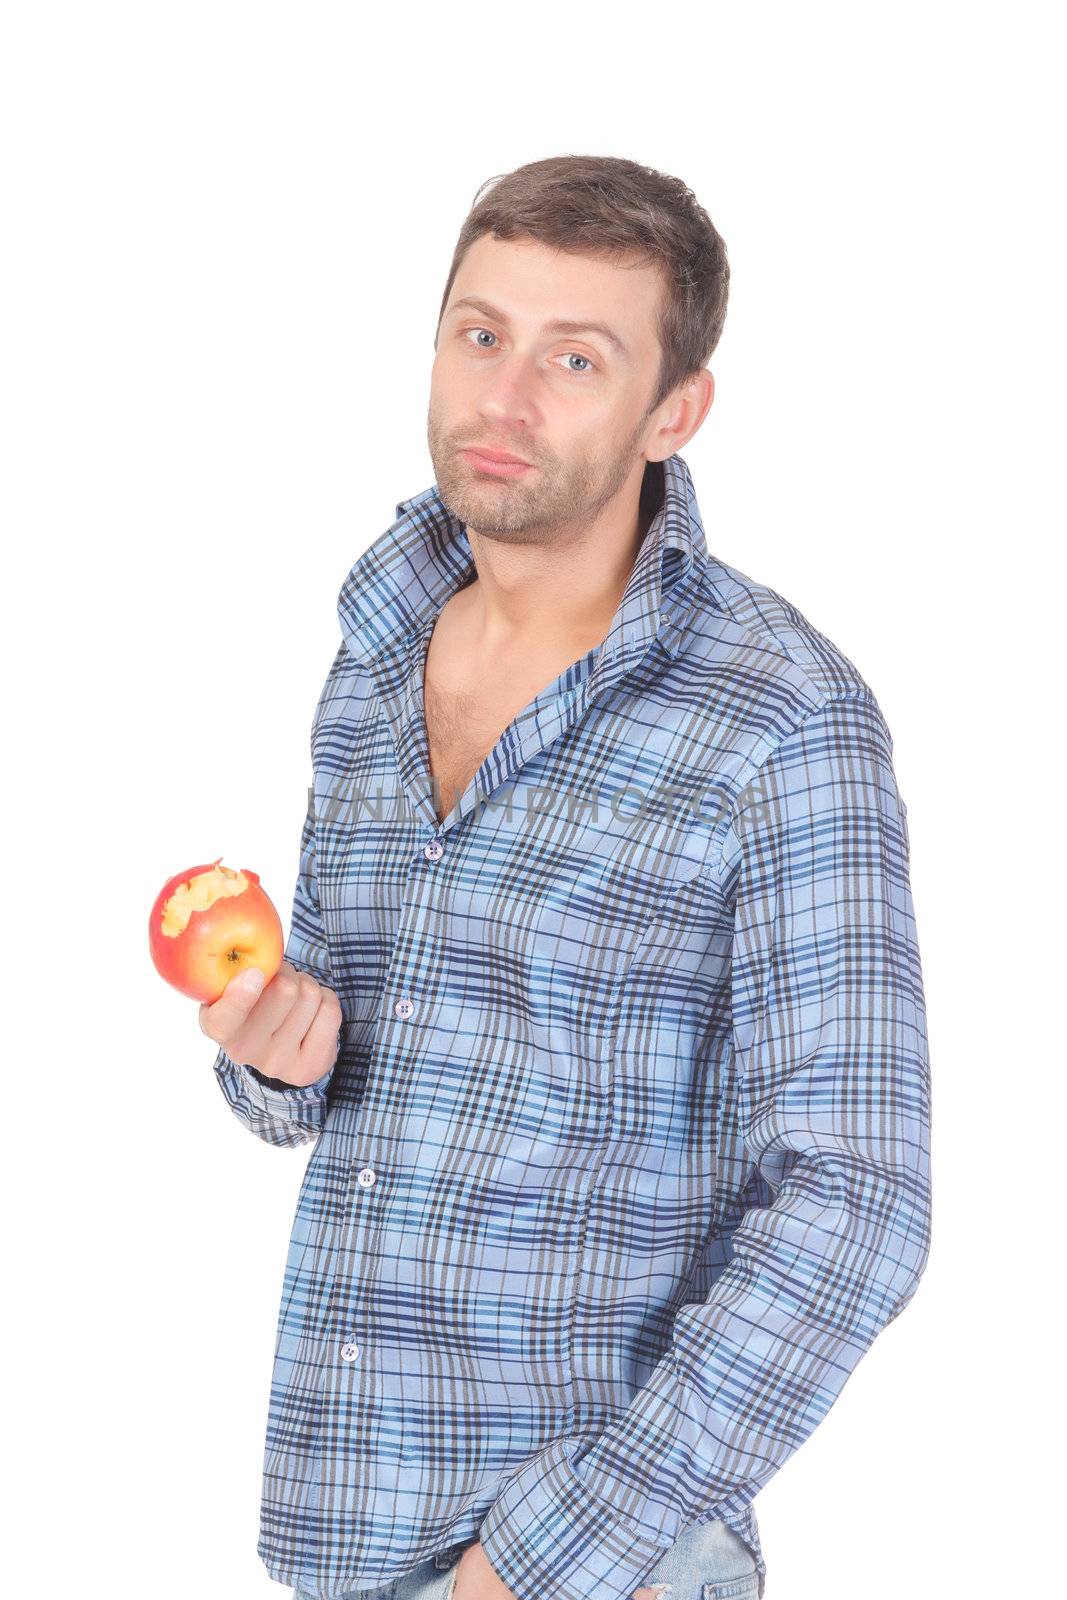 Handsome casual man eat apple over a white background